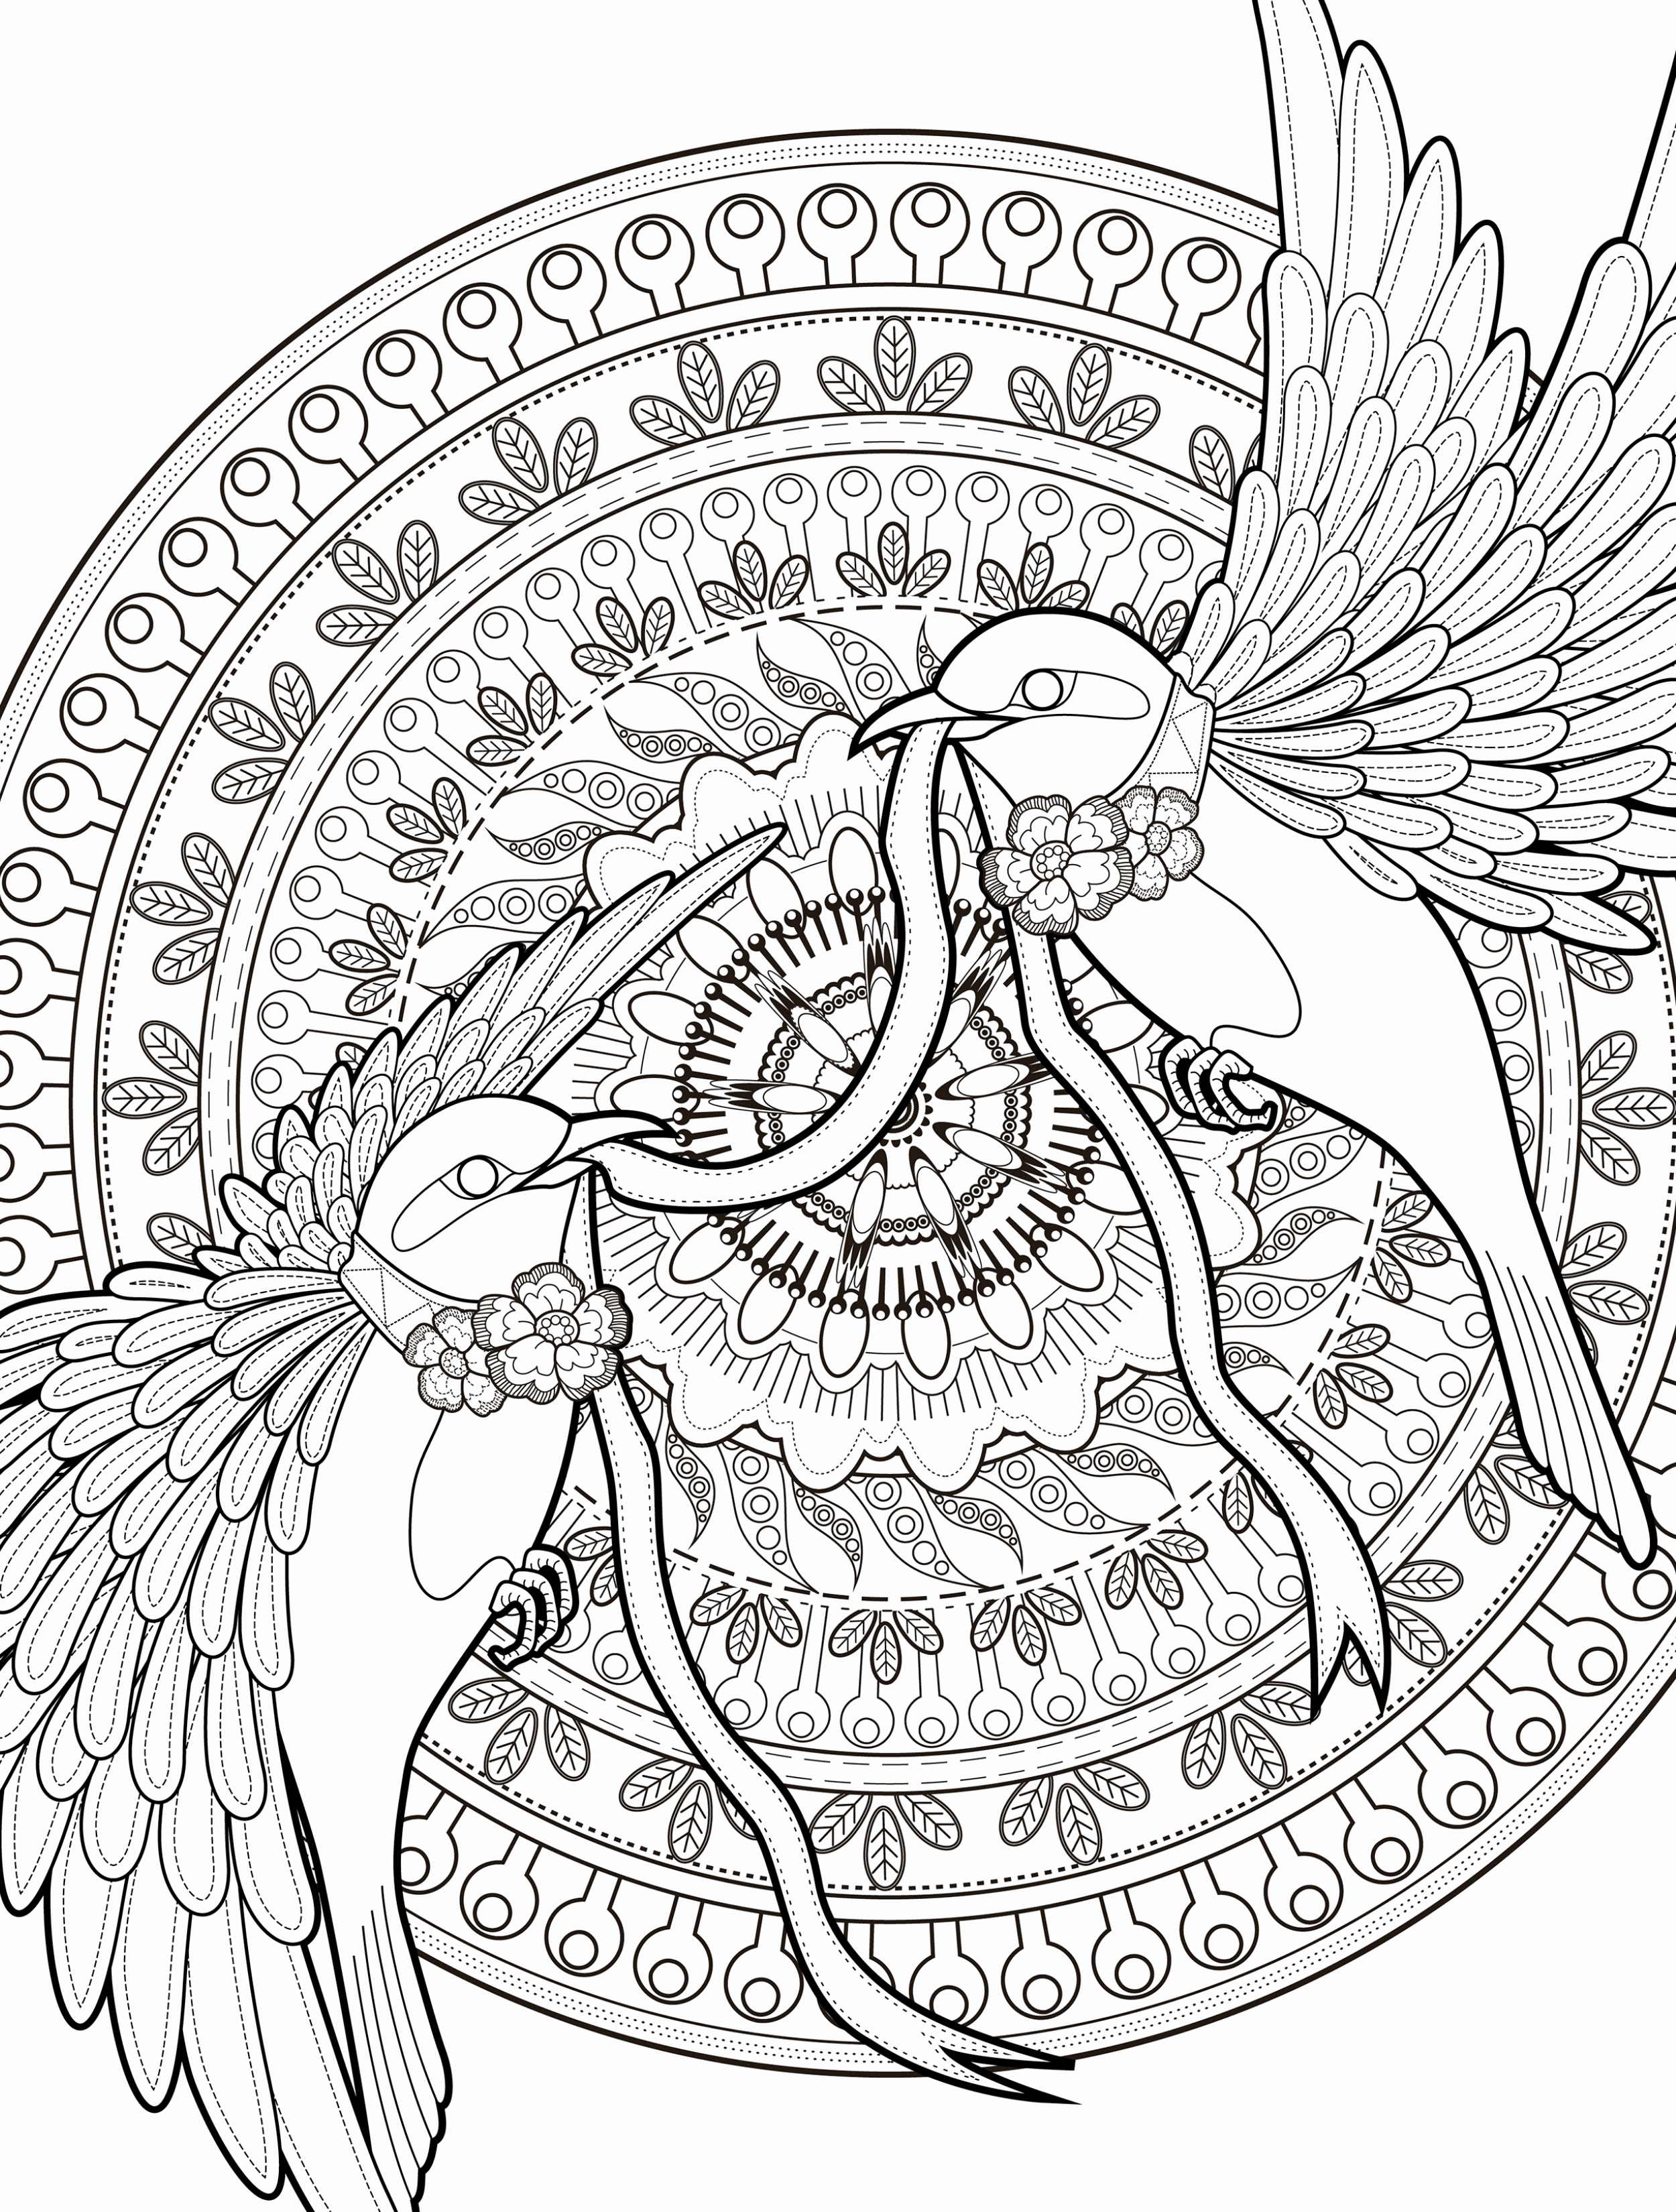 free-adult-coloring-pages-pdf-at-getcolorings-free-printable-colorings-pages-to-print-and